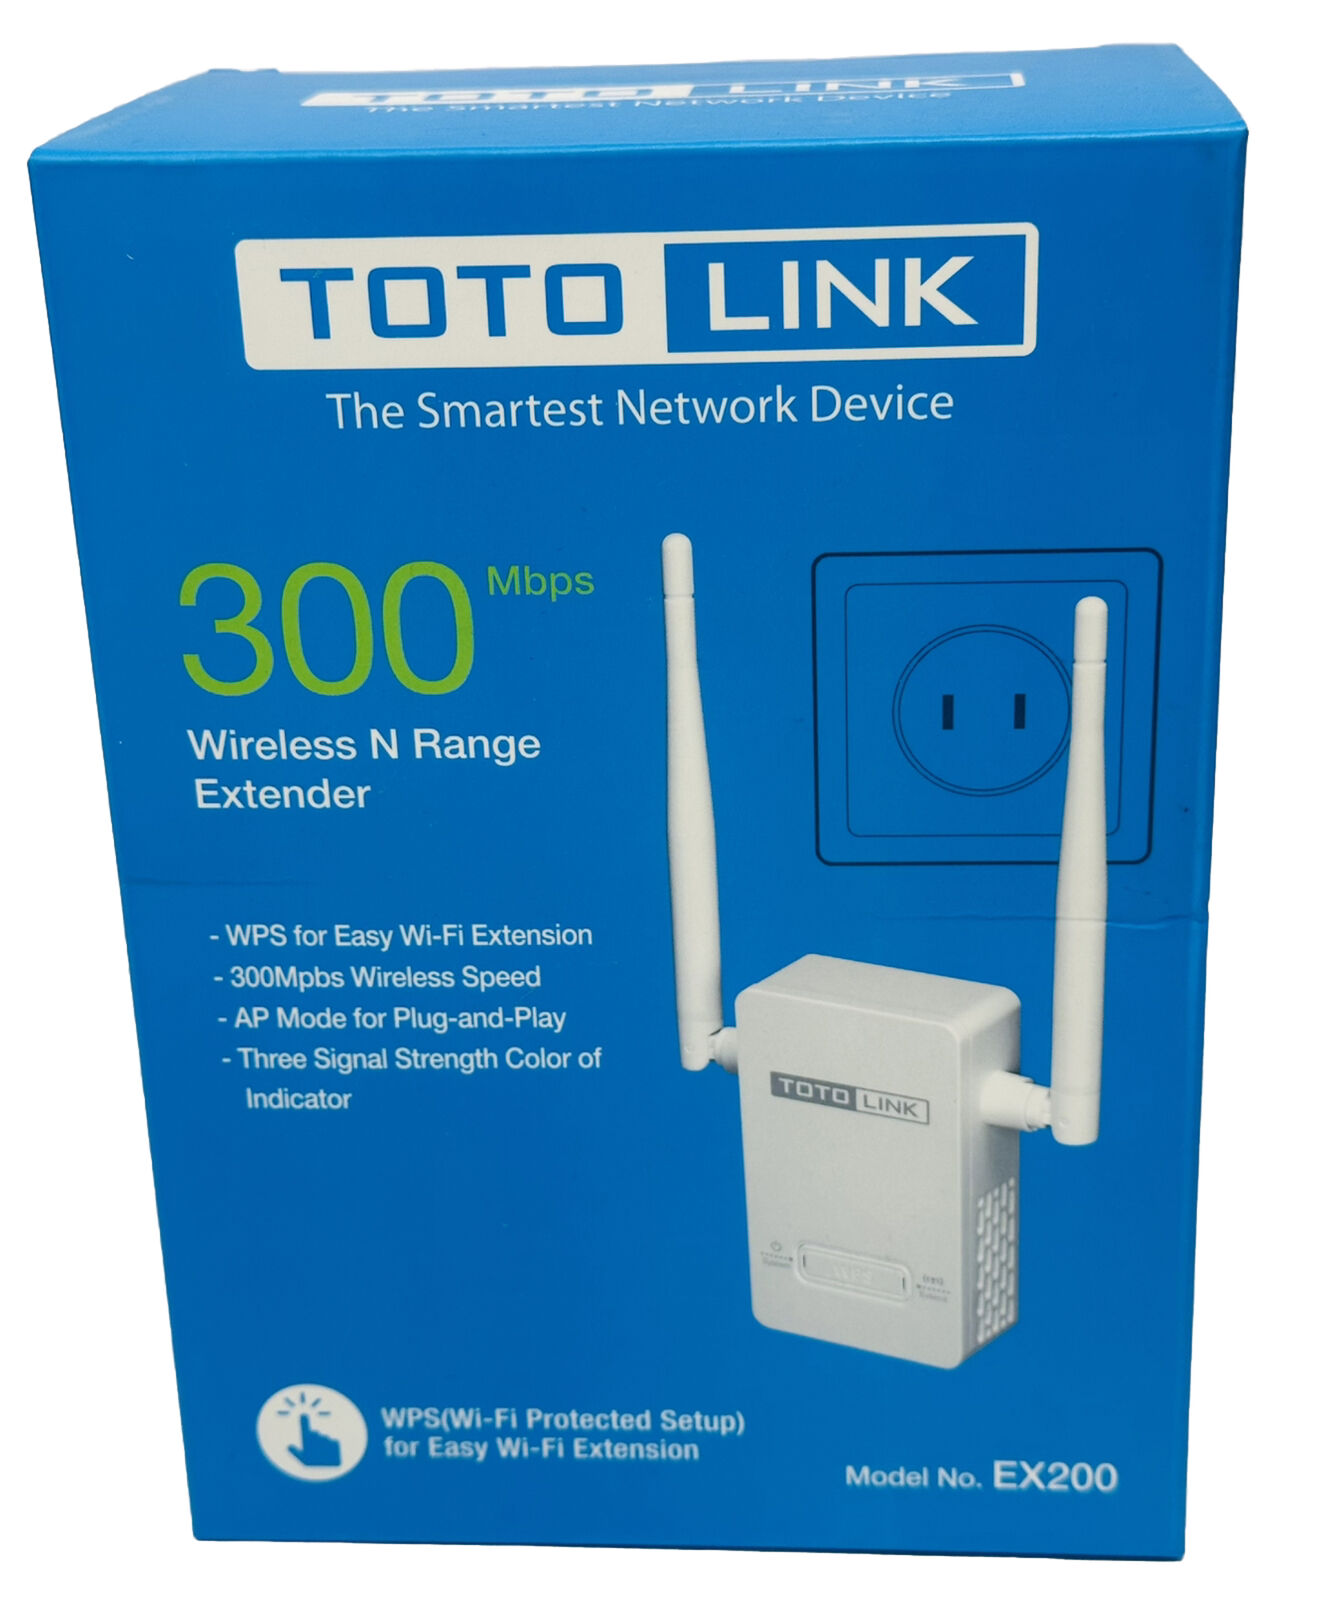 NEW WPS 300Mbps WiFi Range Extender Wireless Repeater Wall Plug-in Easy Setup